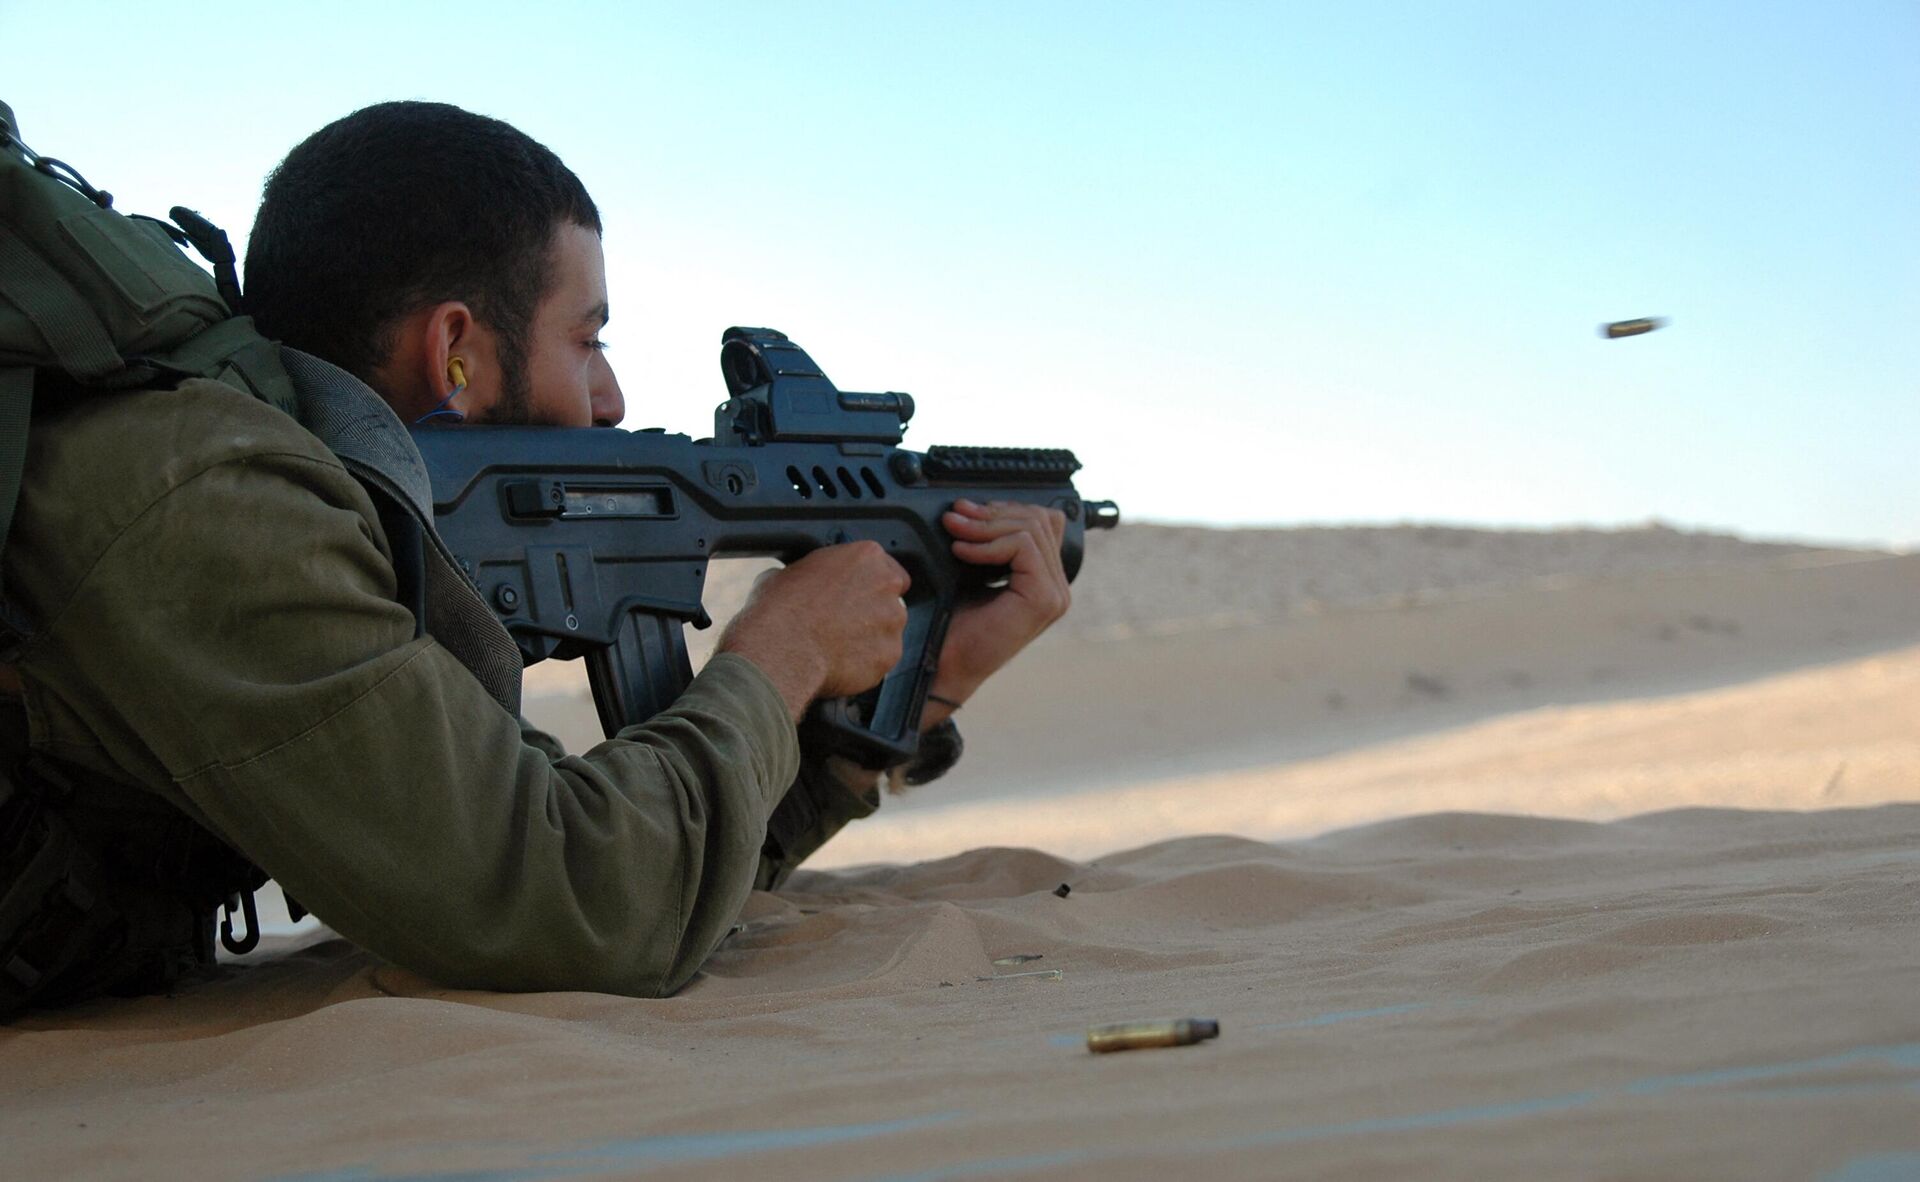 An Israeli soldier fires a TAR-21 weapon, which stands for Tavor Assault Rifle - 21st Century at a military shooting range in southern Israel on July 6, 2009. - Sputnik International, 1920, 11.10.2023